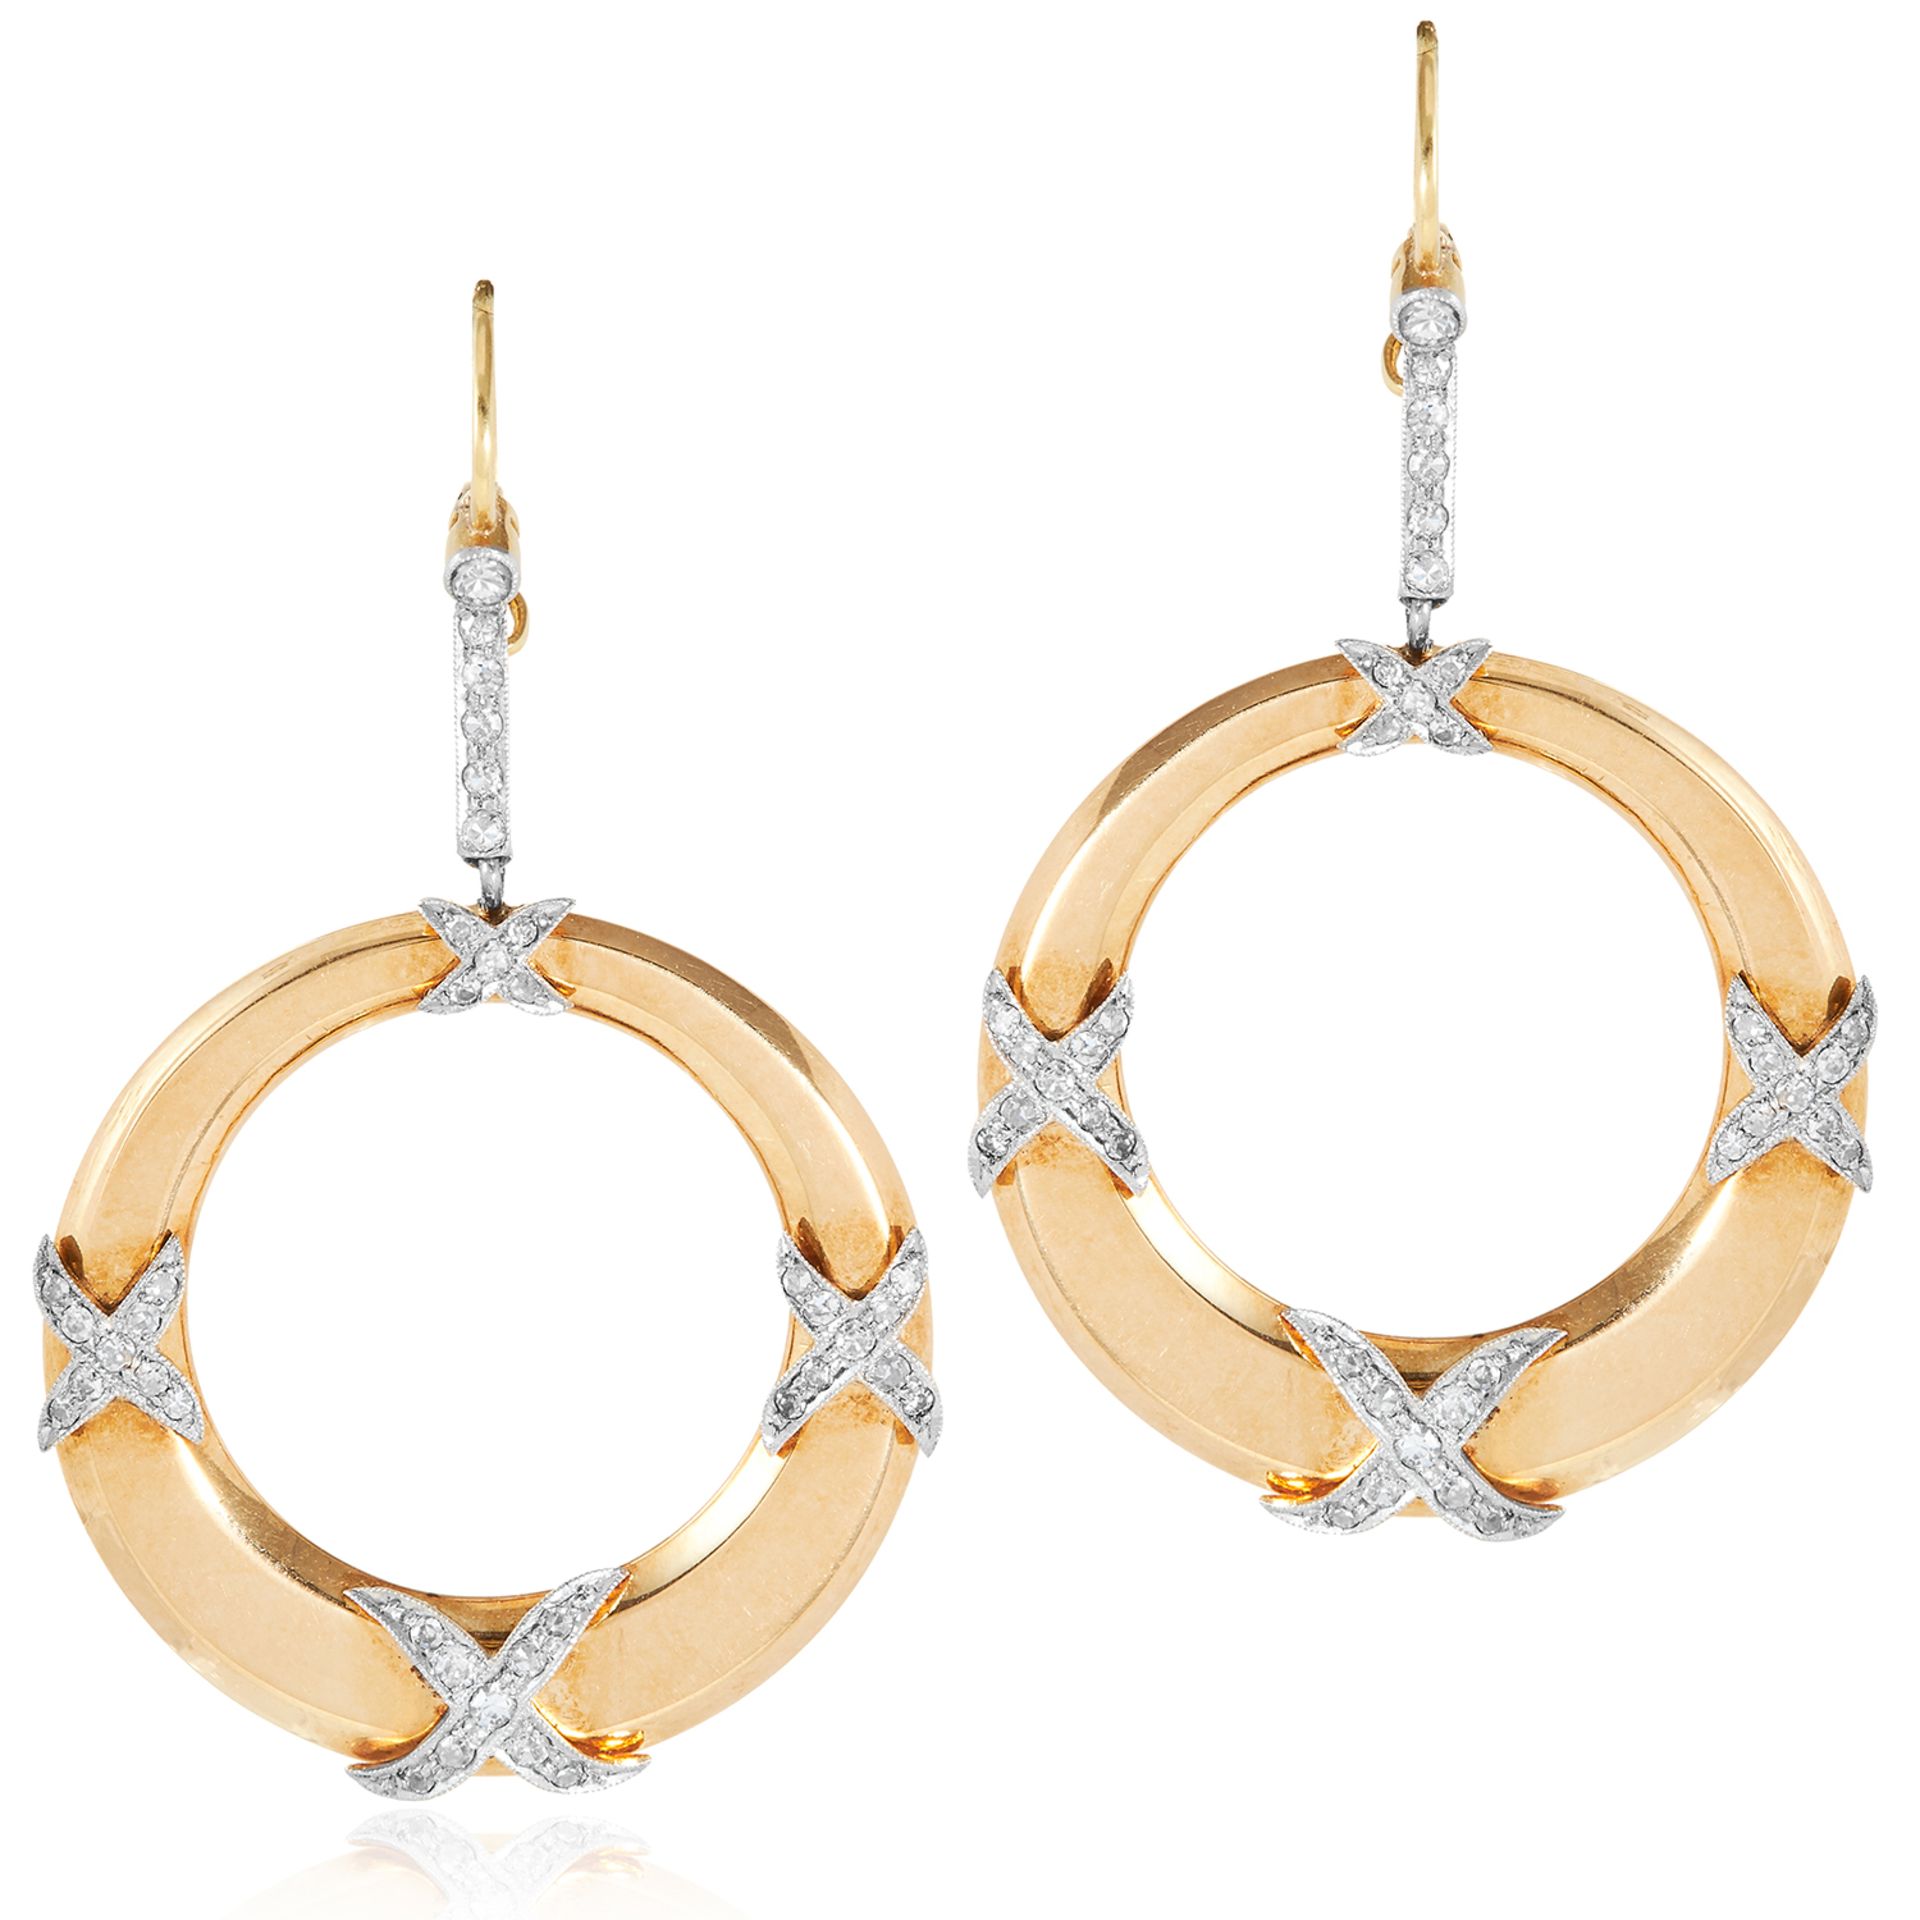 A PAIR OF DIAMOND HOOP EARRINGS in high carat yellow gold, in the manner of Jean Schlumberger for